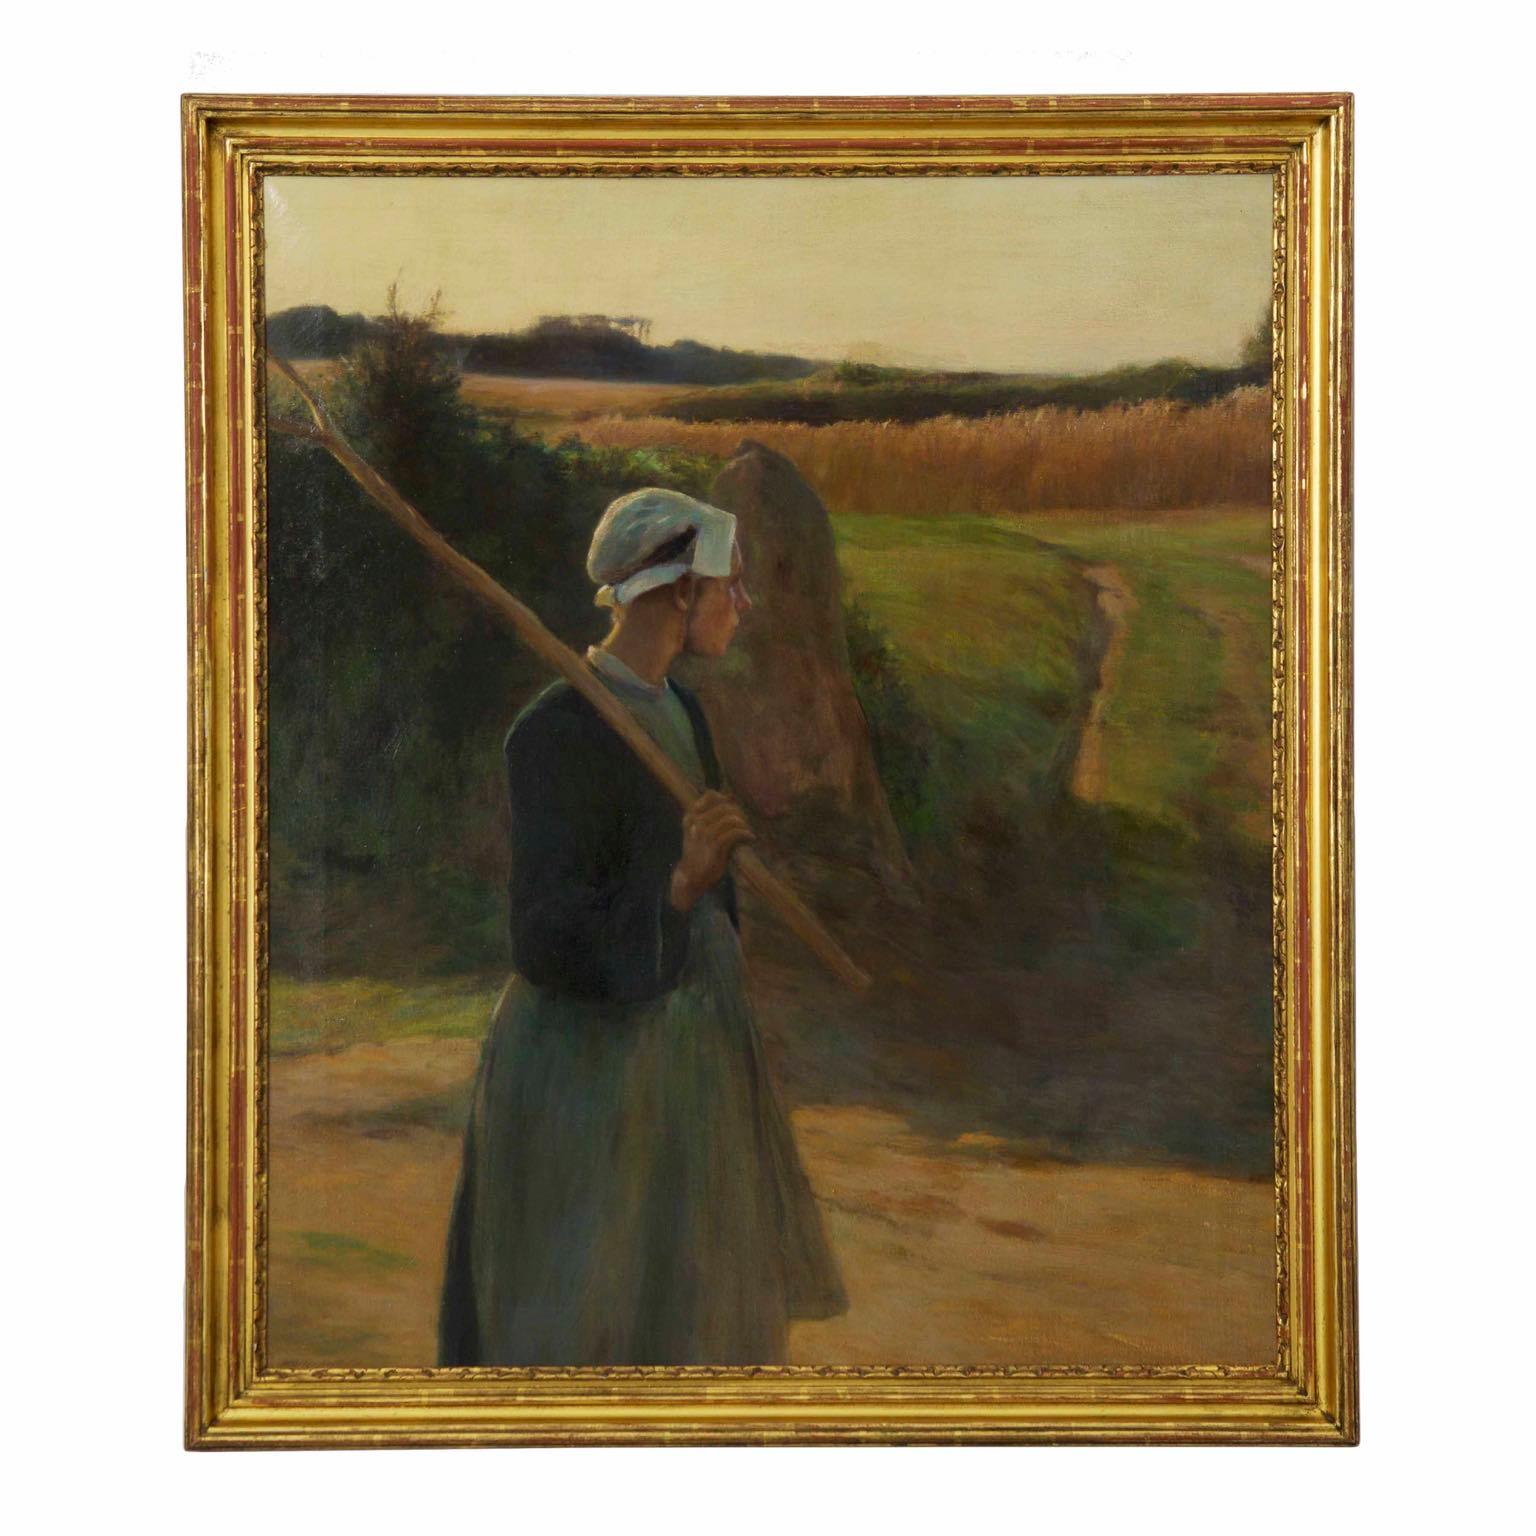 Walter Nettleton (American, 1861-1936) Antique Oil Painting of a Peasant Woman